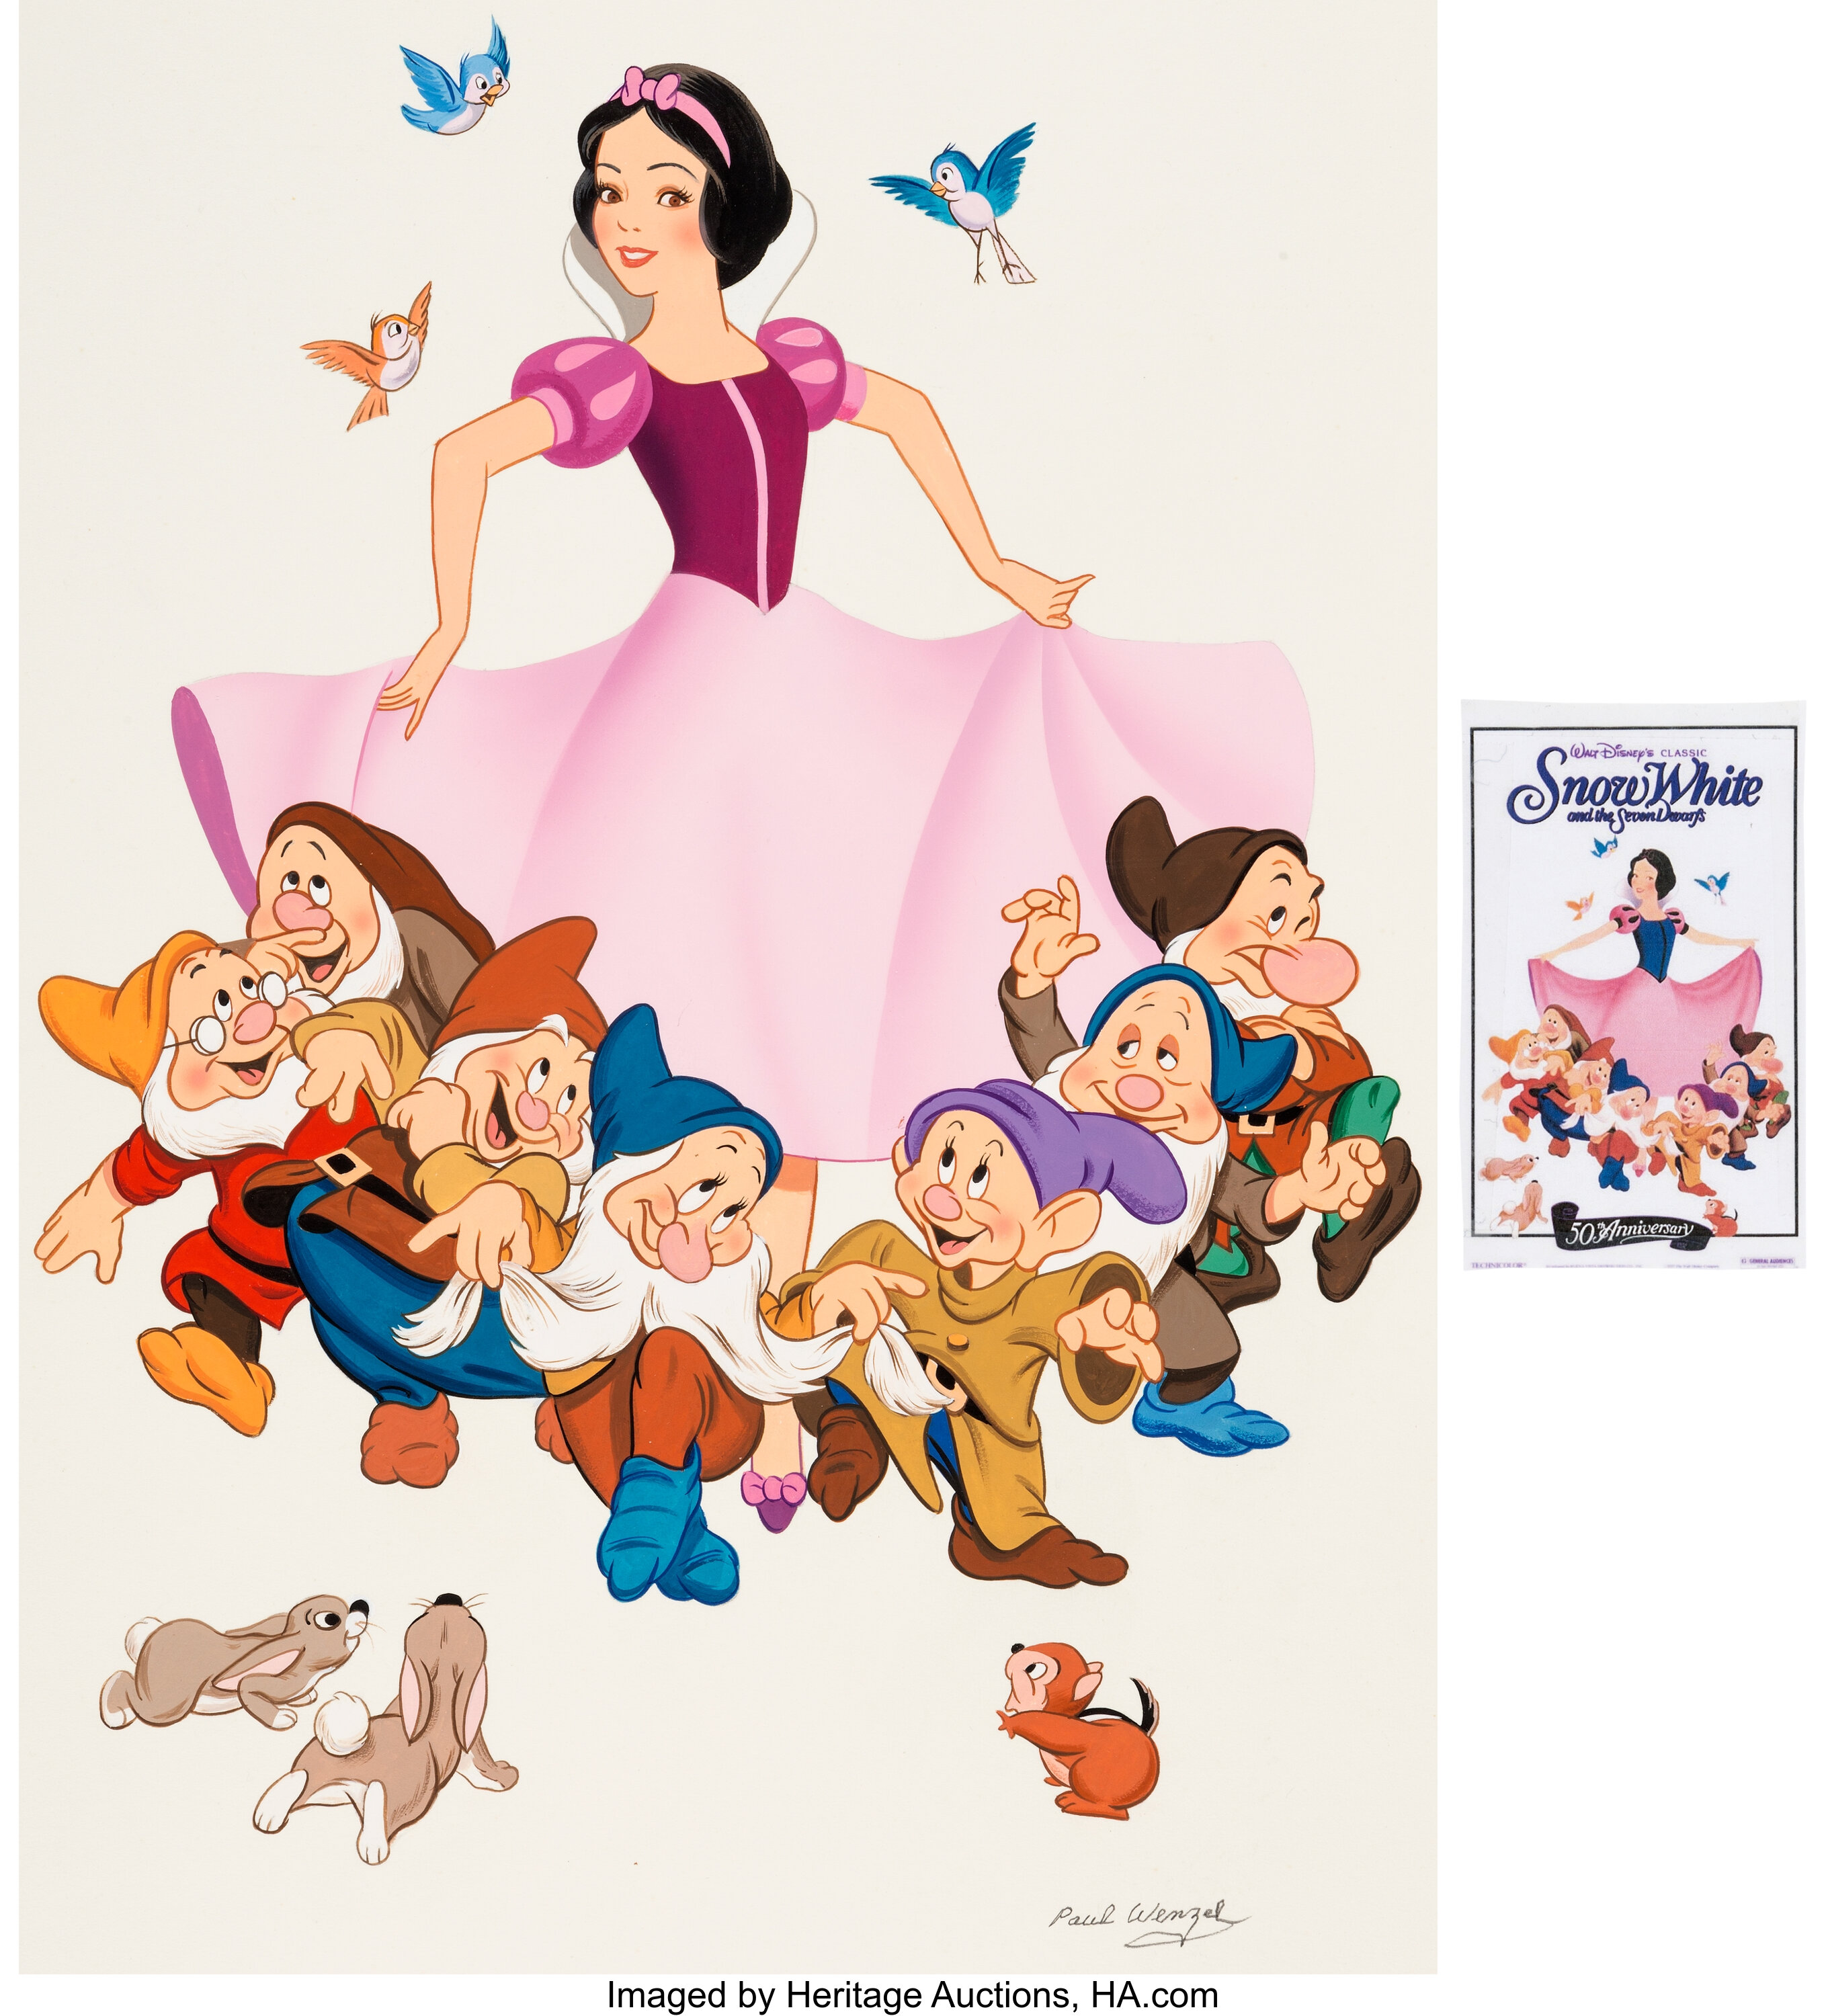 Snow White And The Seven Dwarfs Re Issue Poster Original Art By Lot 97244 Heritage Auctions 